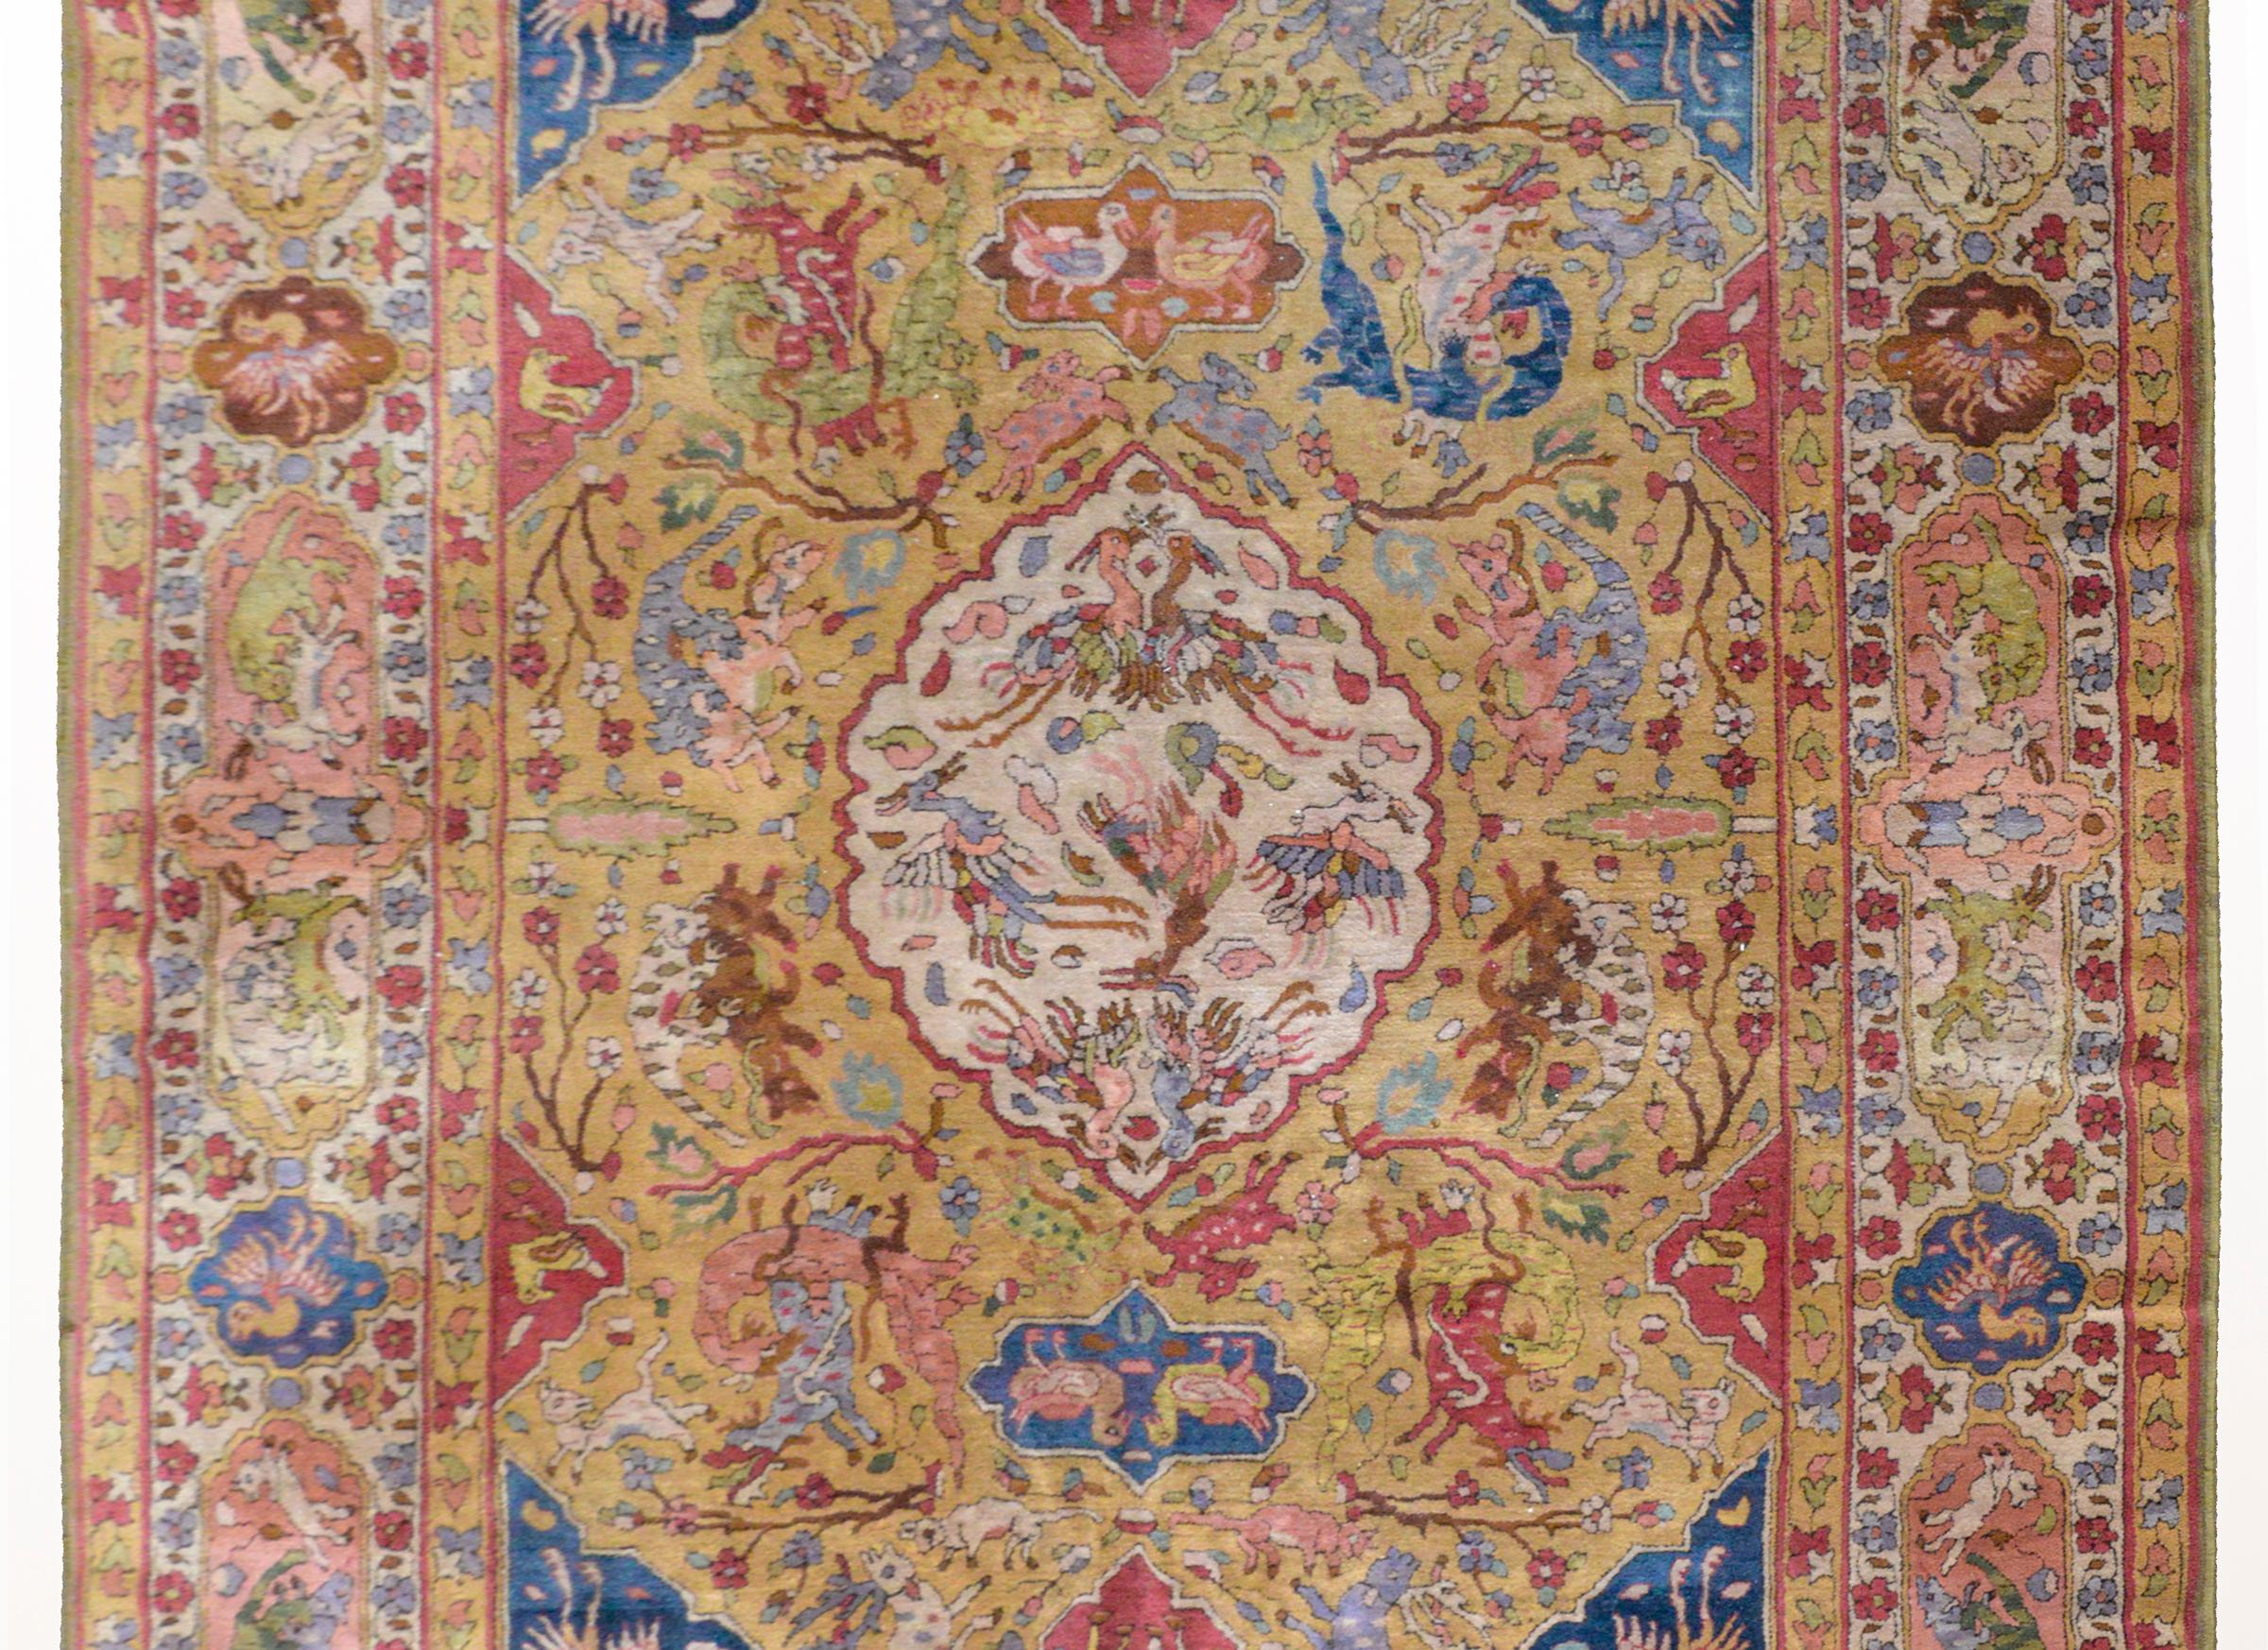 An incredible early 20th century German Tetex rug woven with a traditional Persian Tabriz pattern containing myriad animal including deer, lions, cows, phoenix, boar, and ducks, all woven in indigo, light lavender, coral, green, and white, set